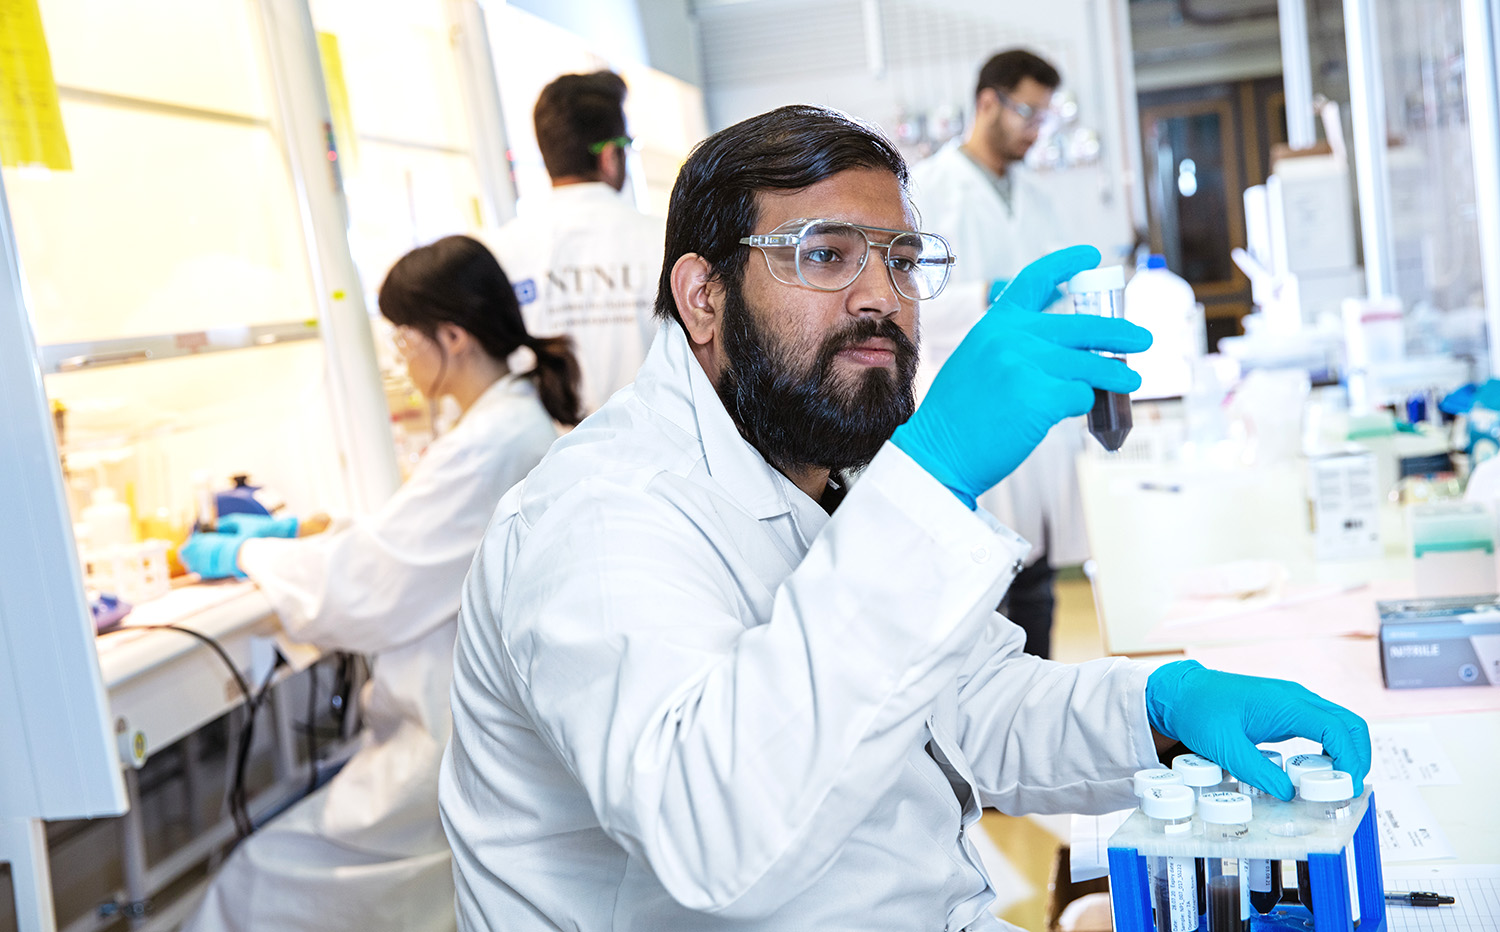 Sulalit Bandyopadhyay in the lab with colleagues. Photo